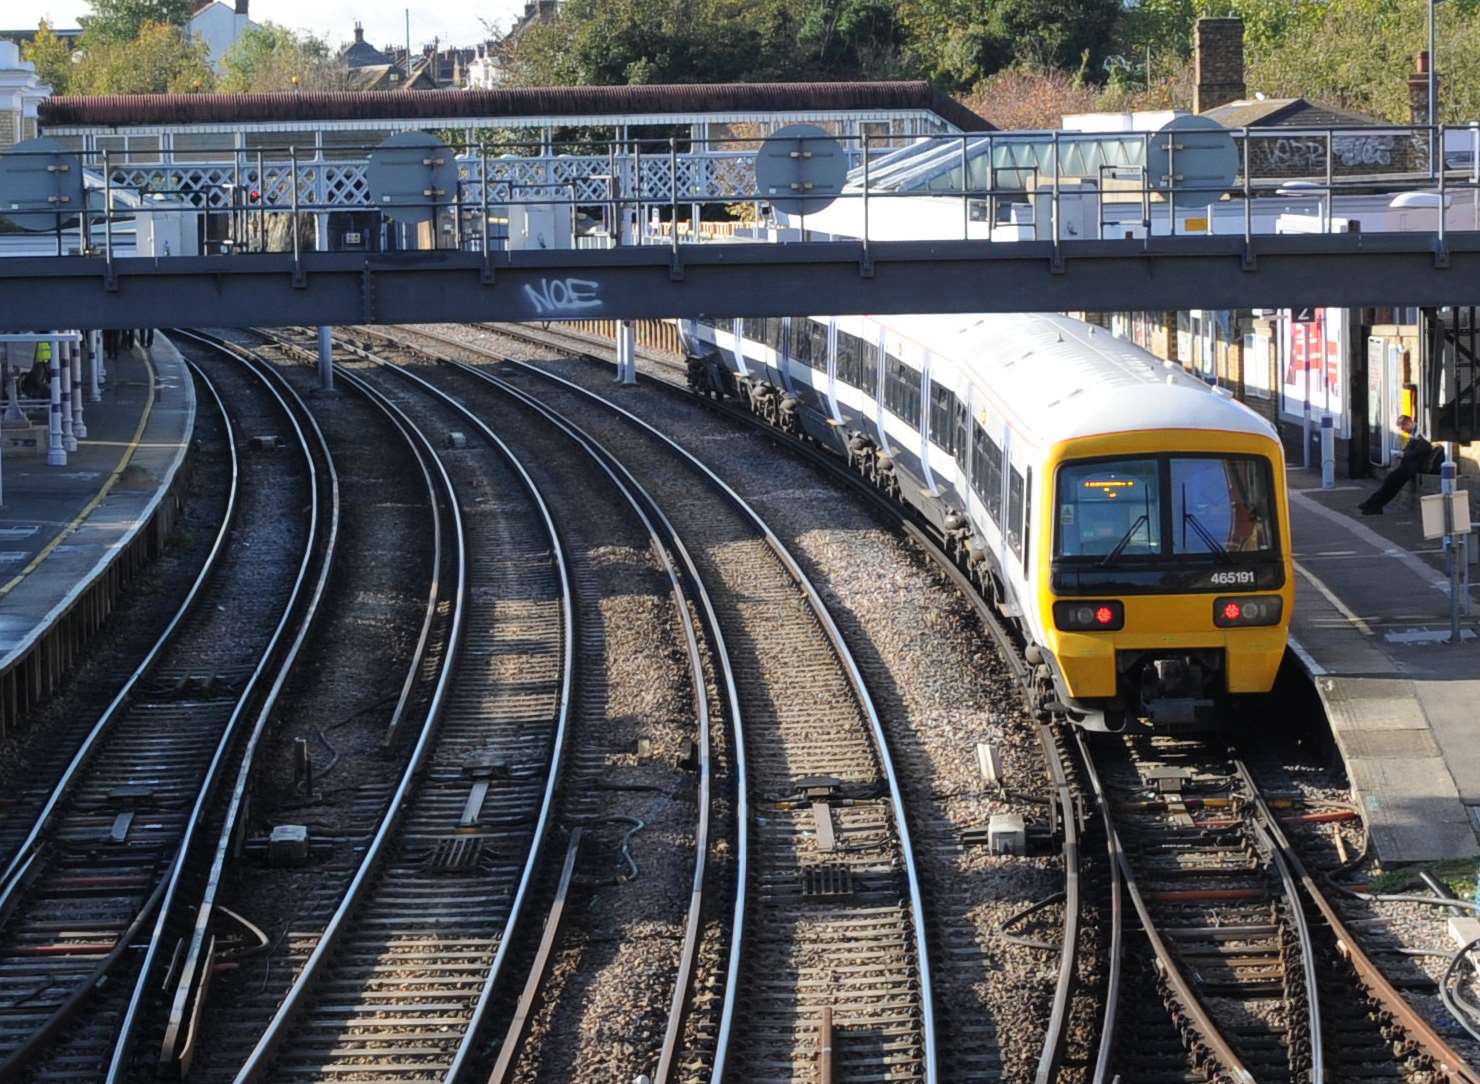 Services are disrupted after a train fault